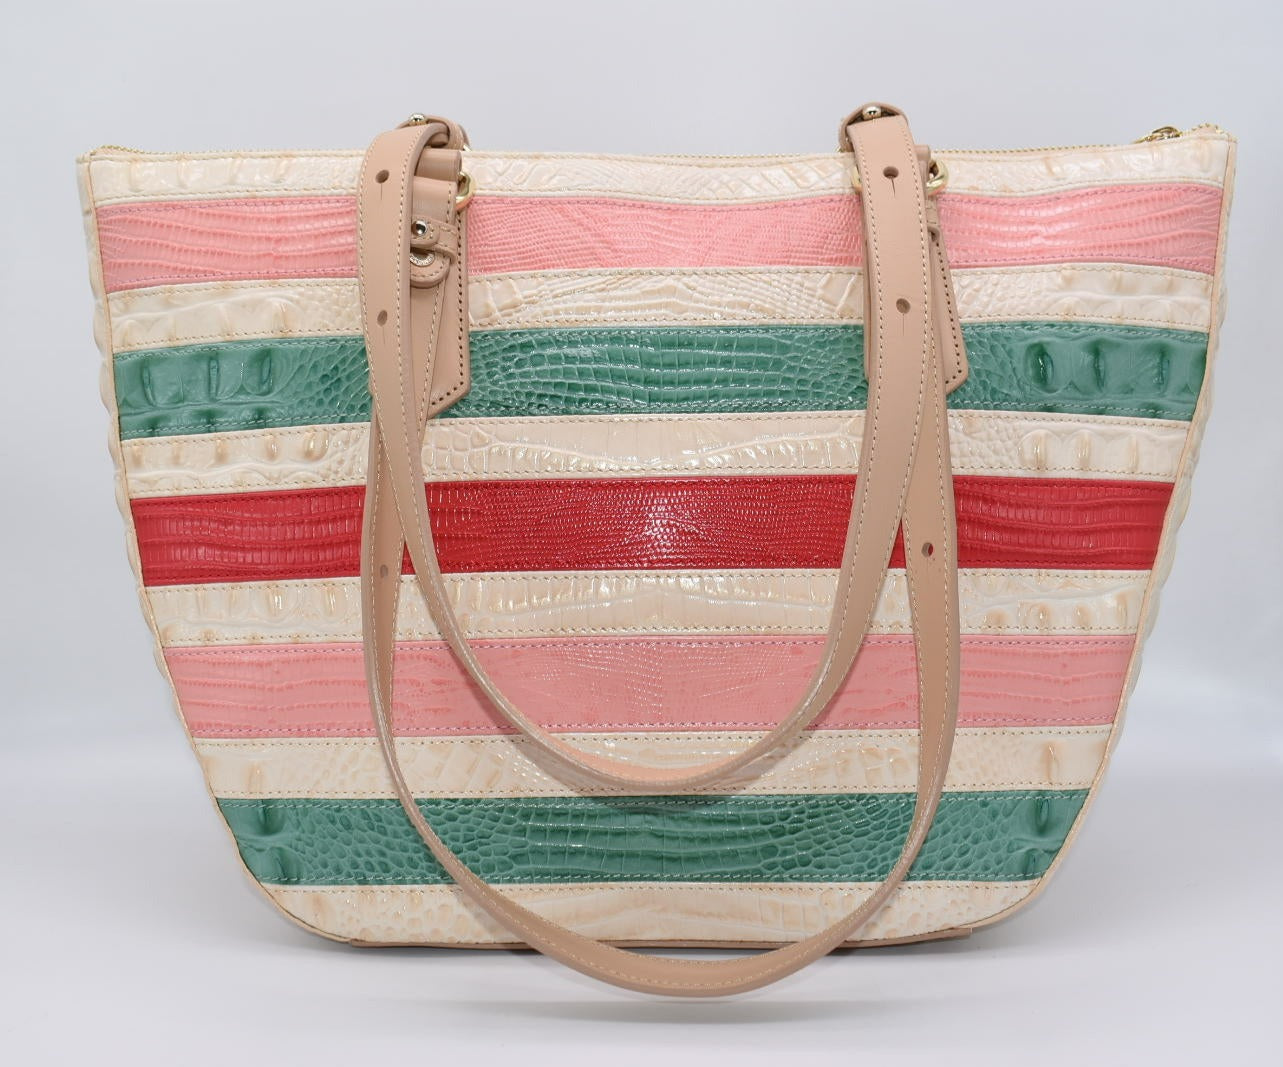 Brahmin Willa Carryall Tote Bag in Sunglow Cayo Coco